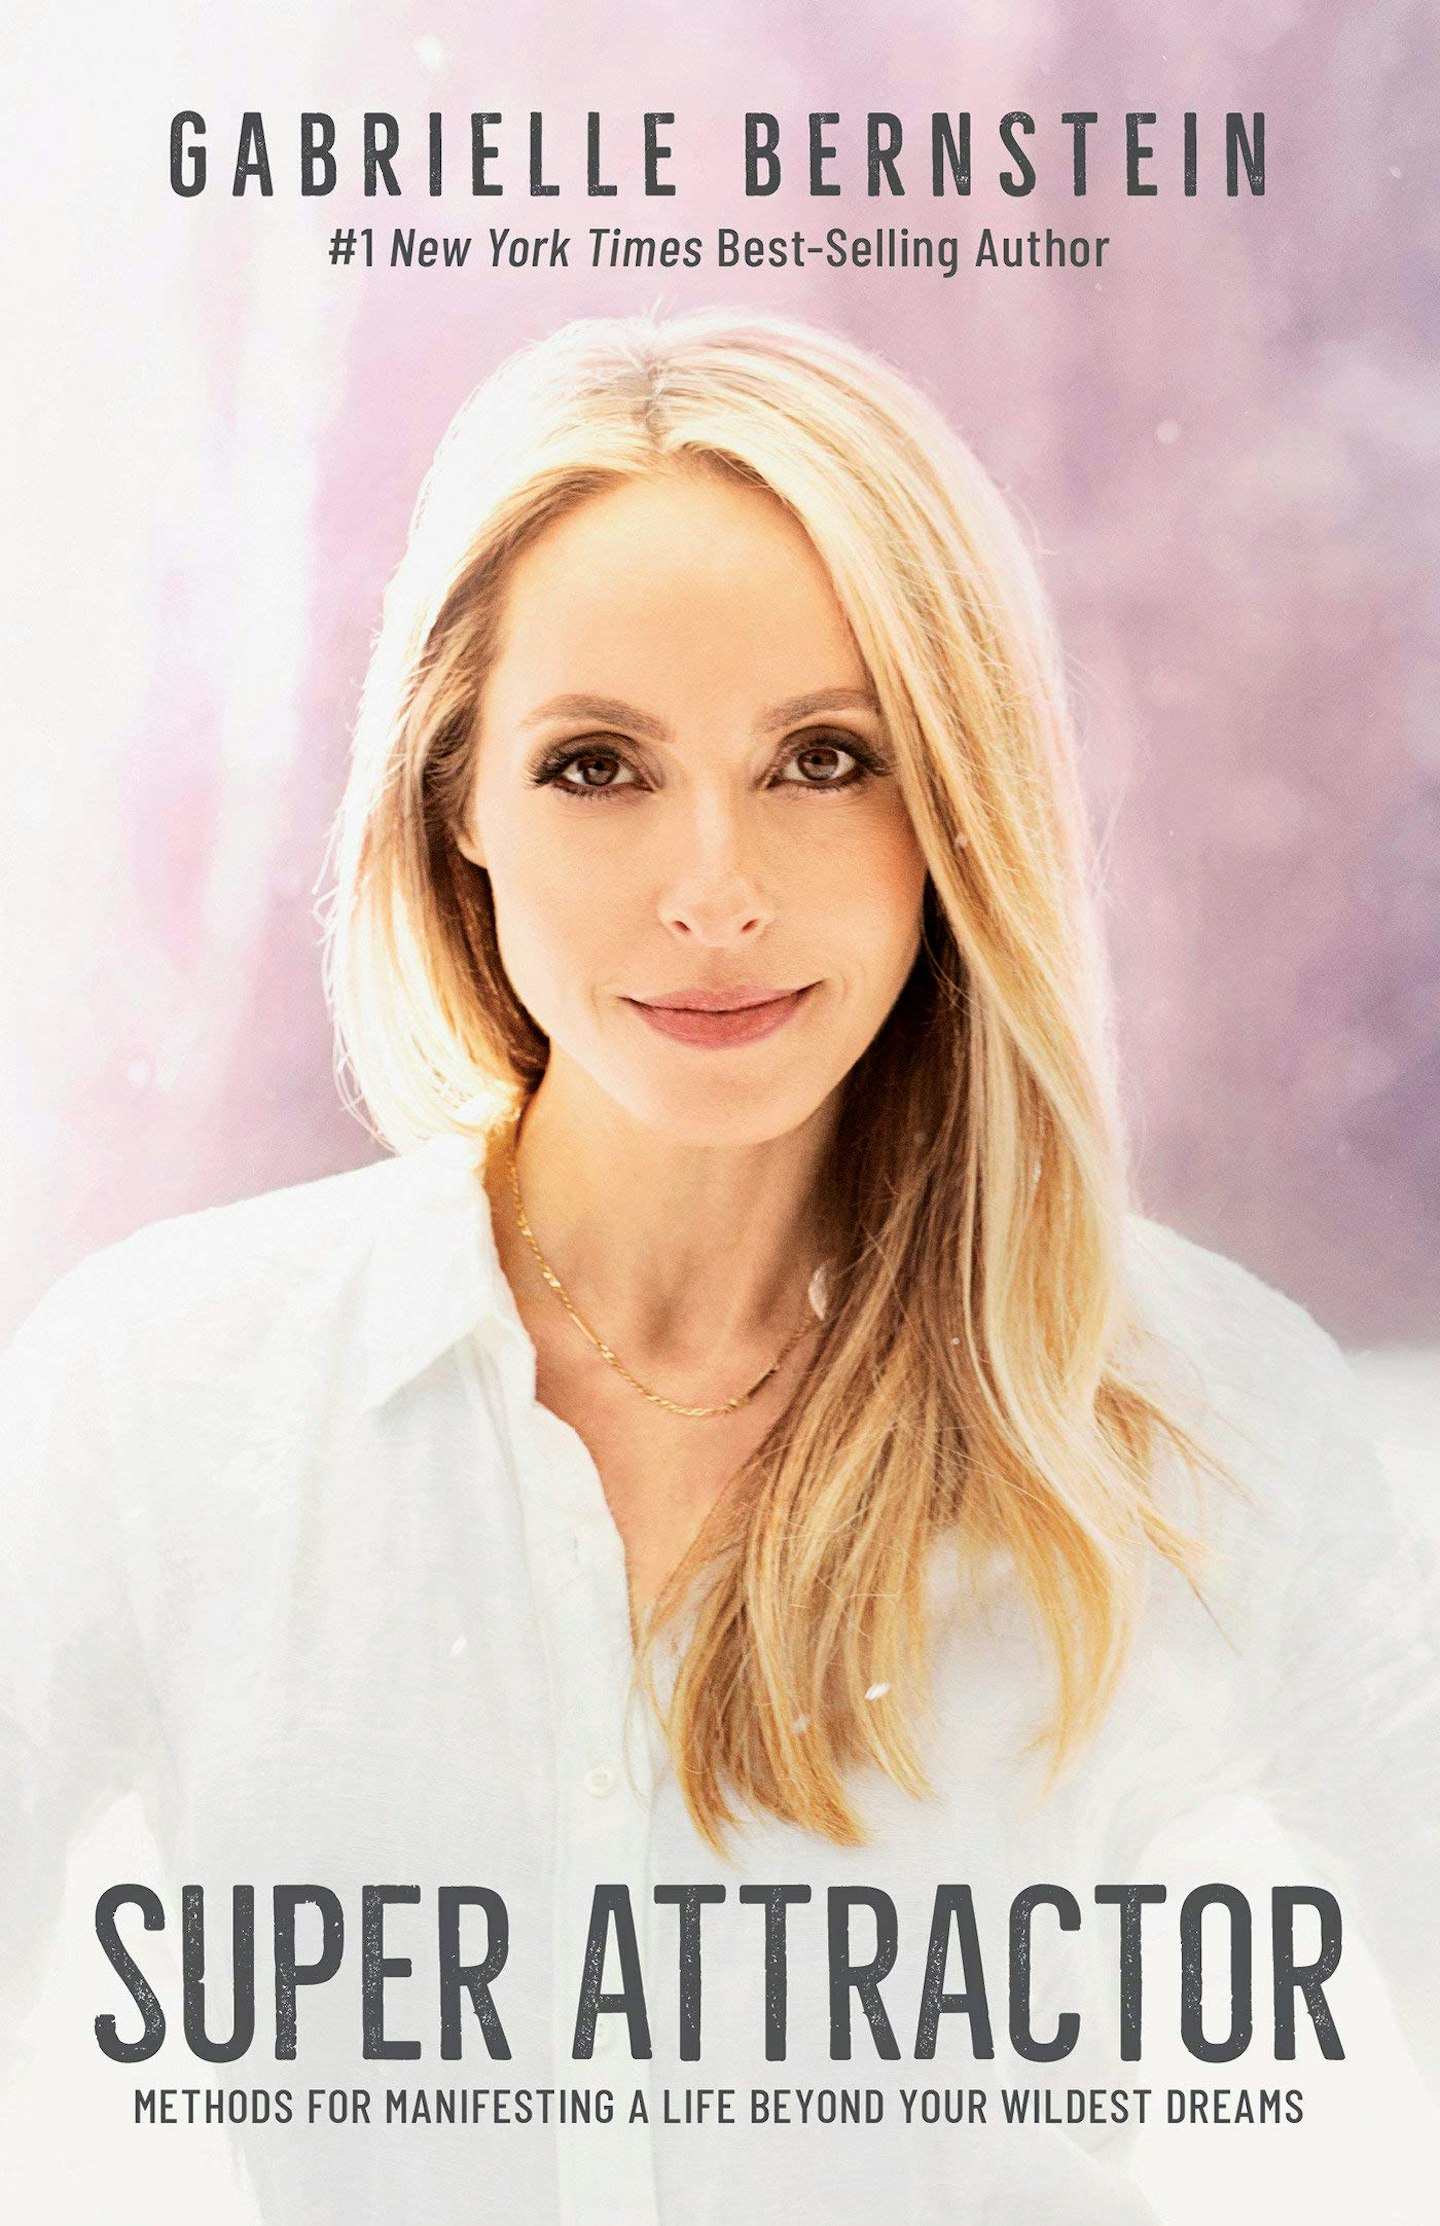 best self help books Super Attractor: Methods for Manifesting a Life beyond Your Wildest Dreams, by Gabrielle Bernstein